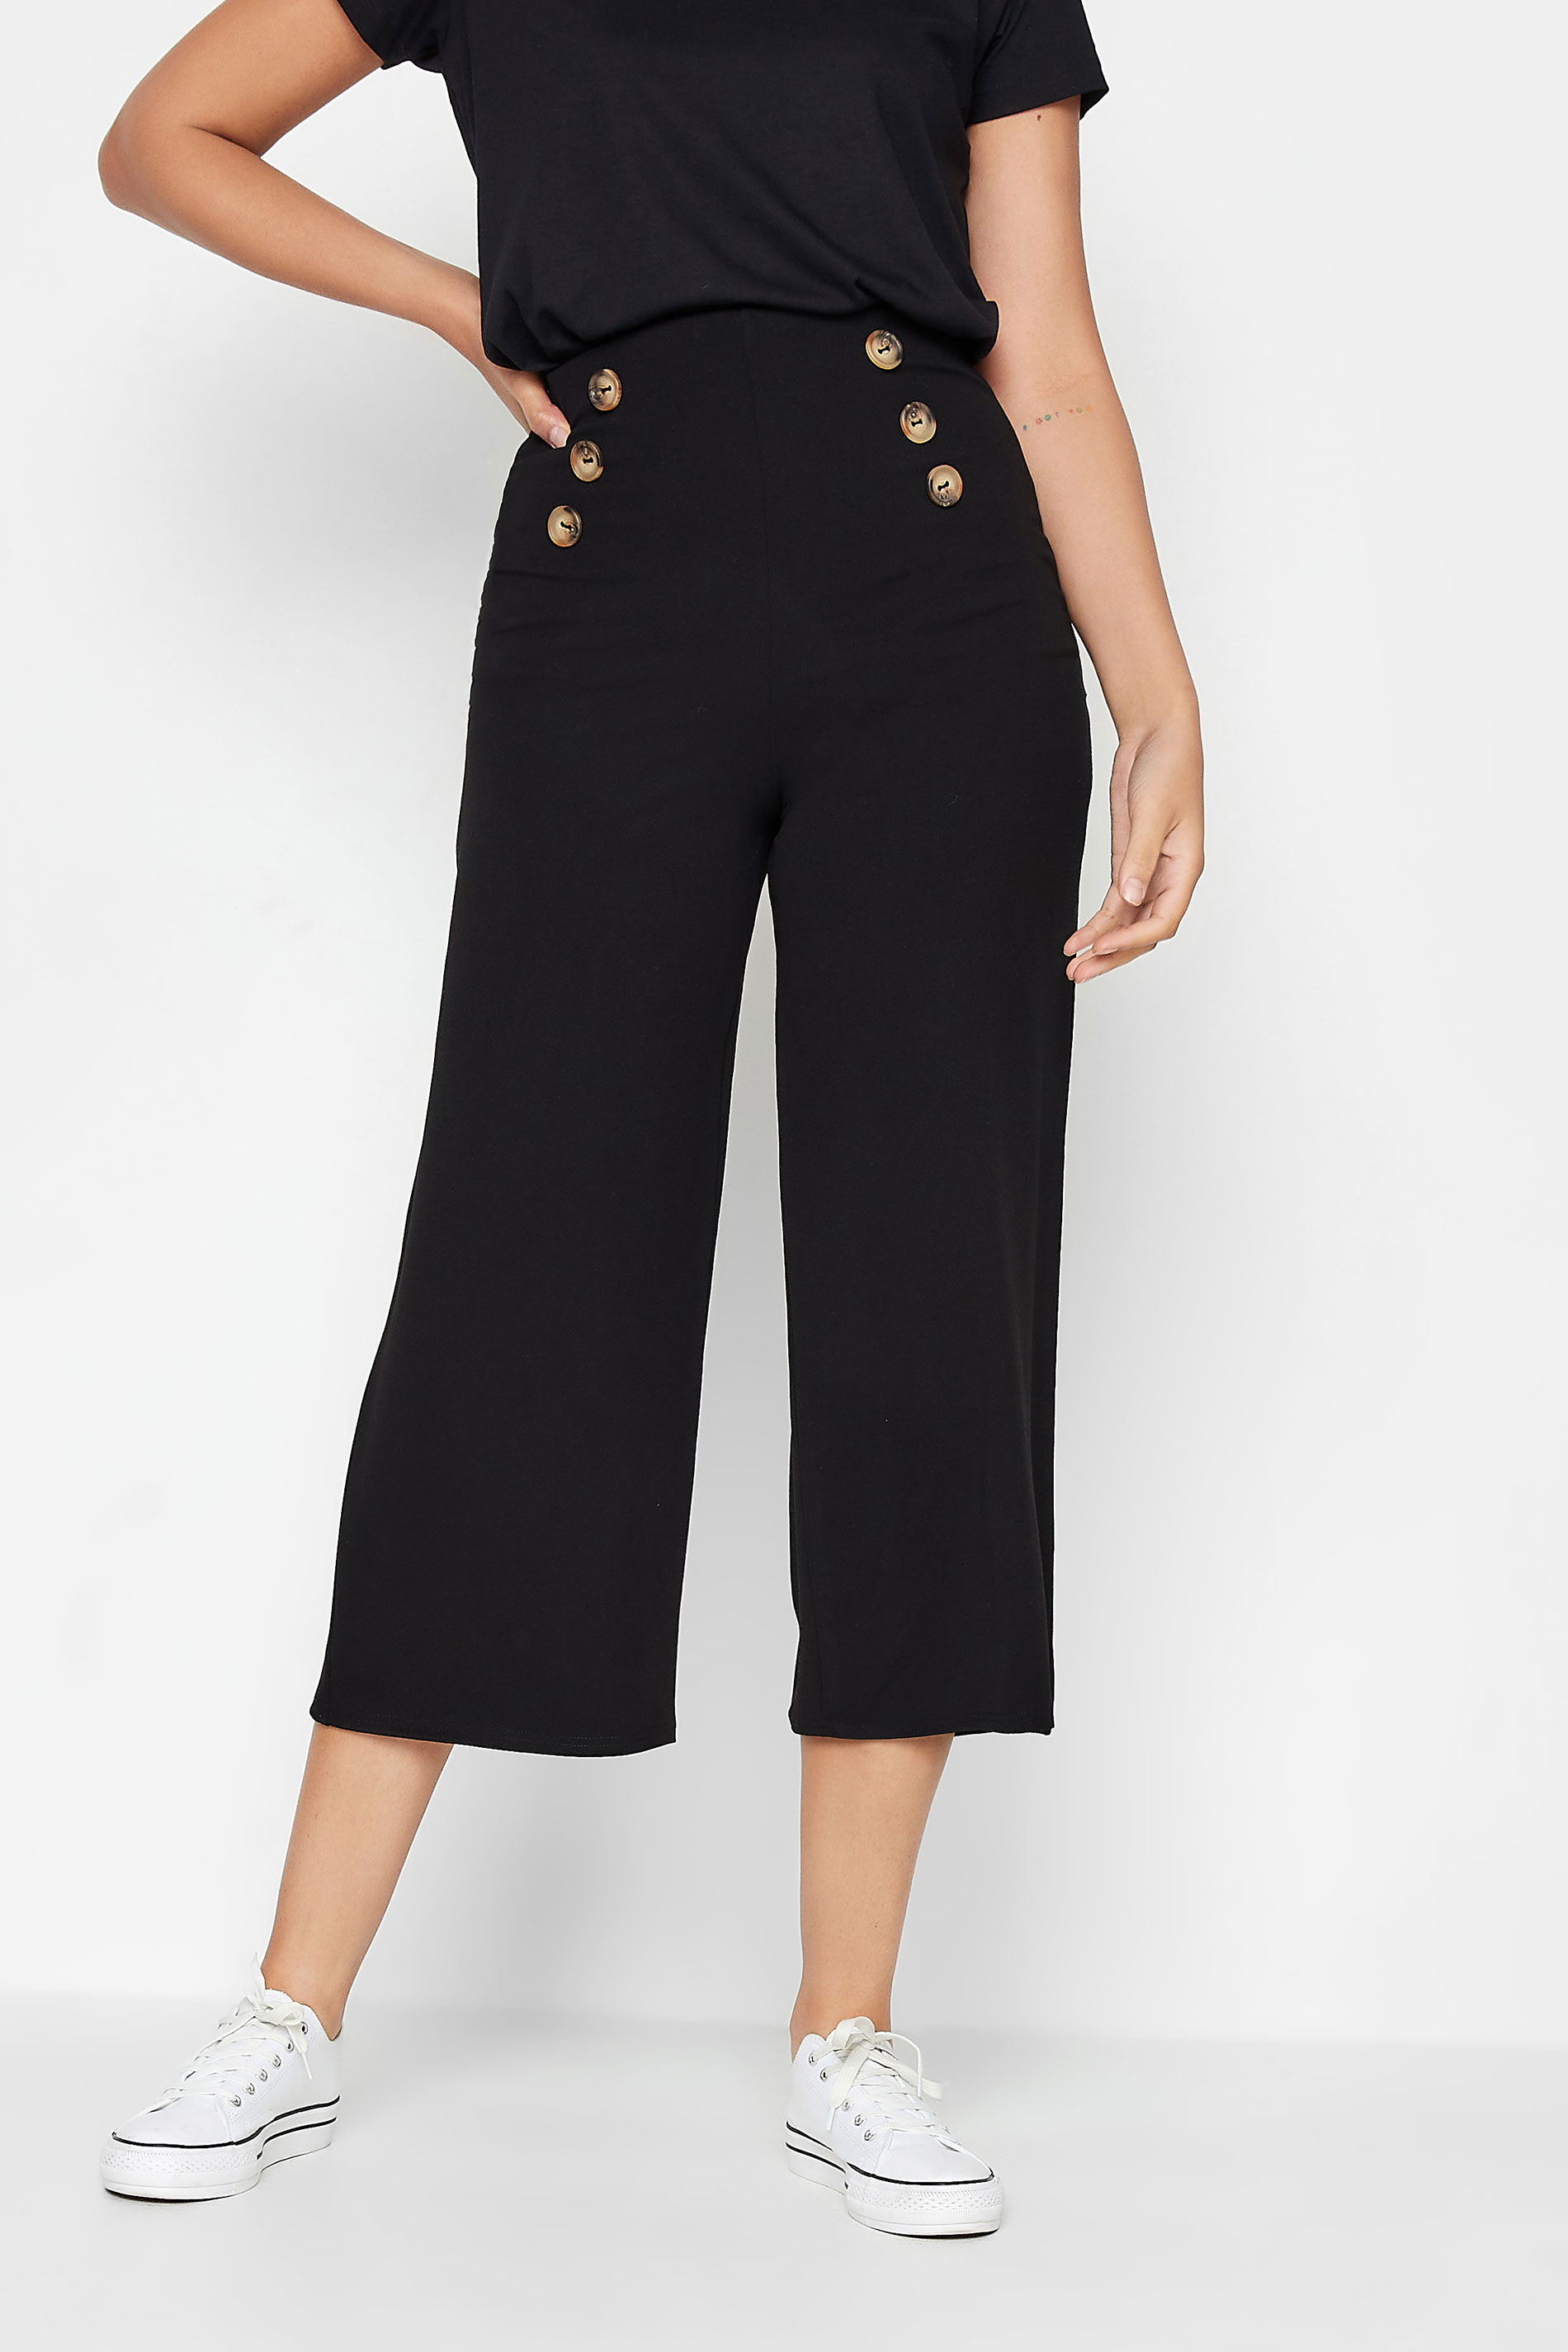 LTS Tall Black Button Cropped Trousers | Long Tall Sally 1